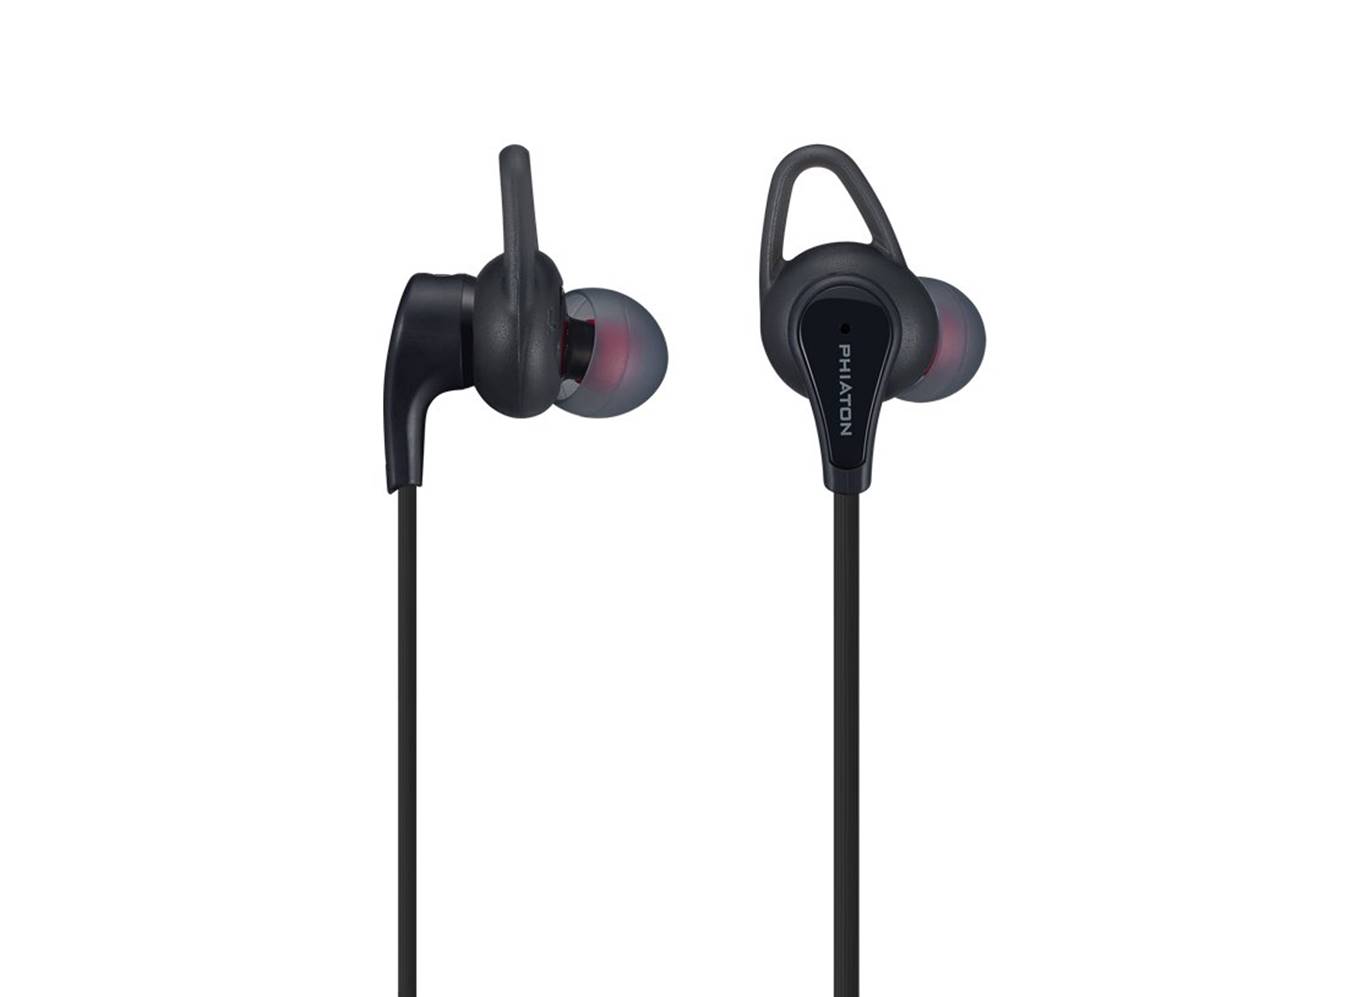 Phiaton BT 120 Noise Cancelling Earbuds